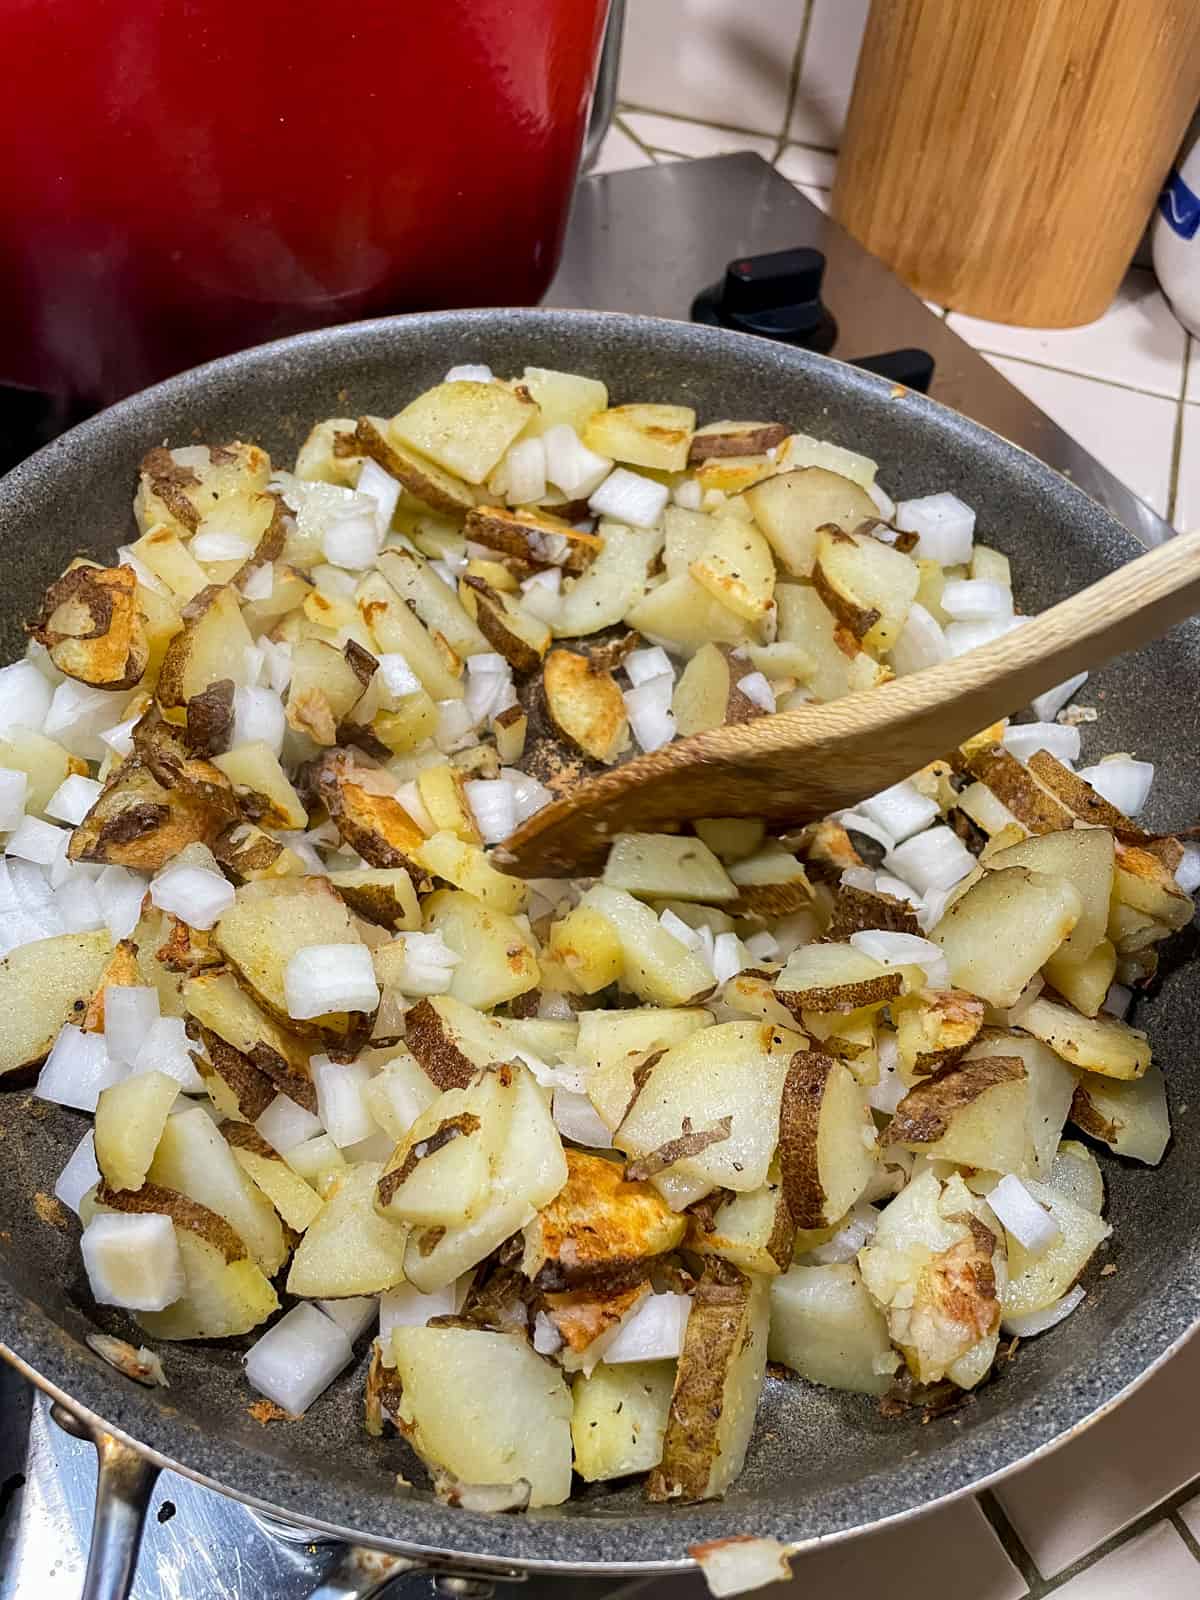 Stirring potatoes and onions in non-stick pan